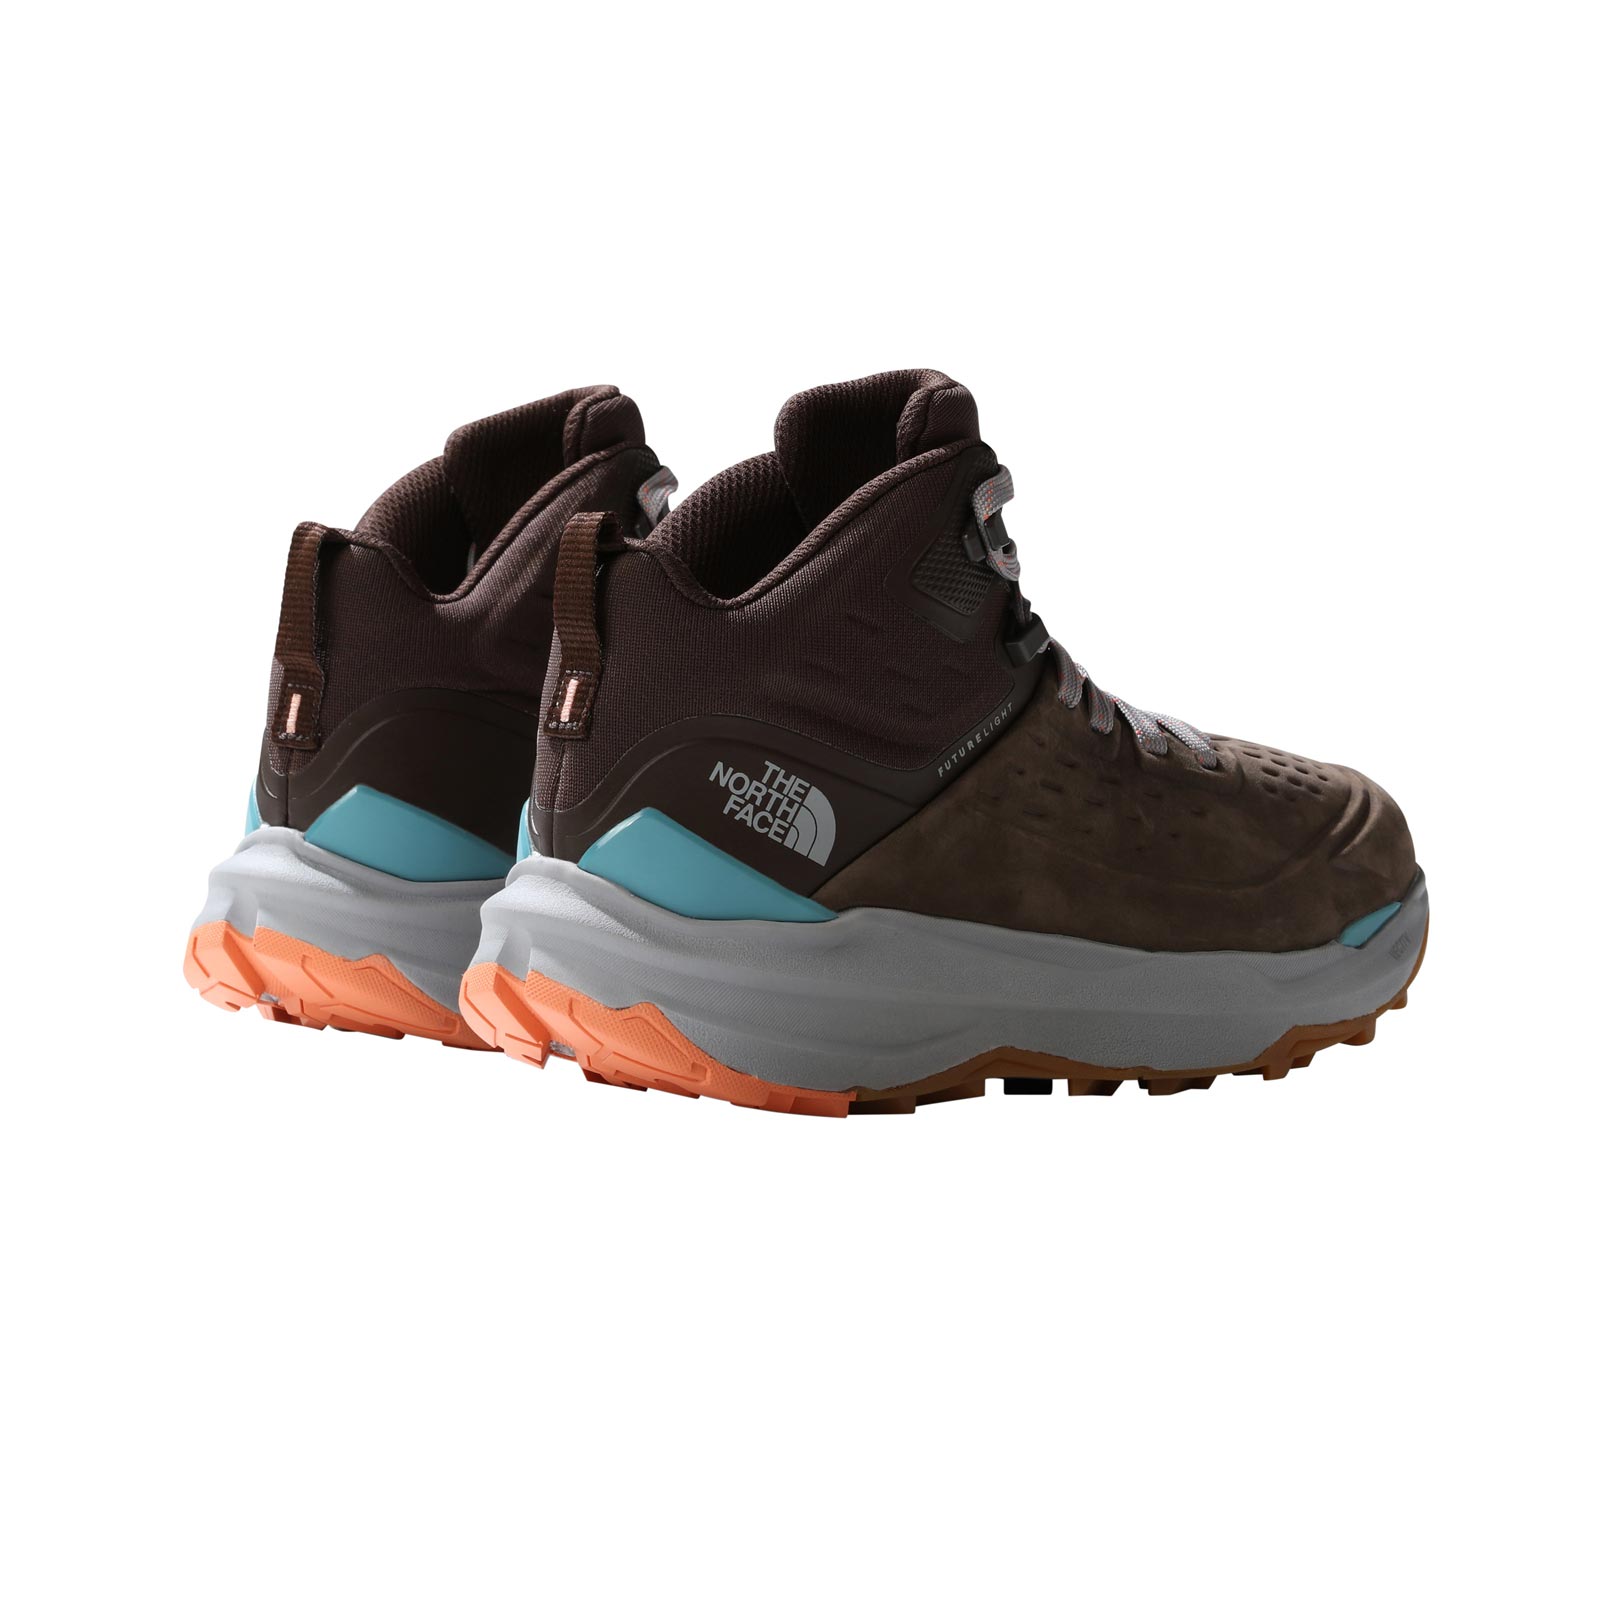 THE NORTH FACE VECTIV EXPLORIS 2 LEATHER MID WOMENS HIKING BOOTS